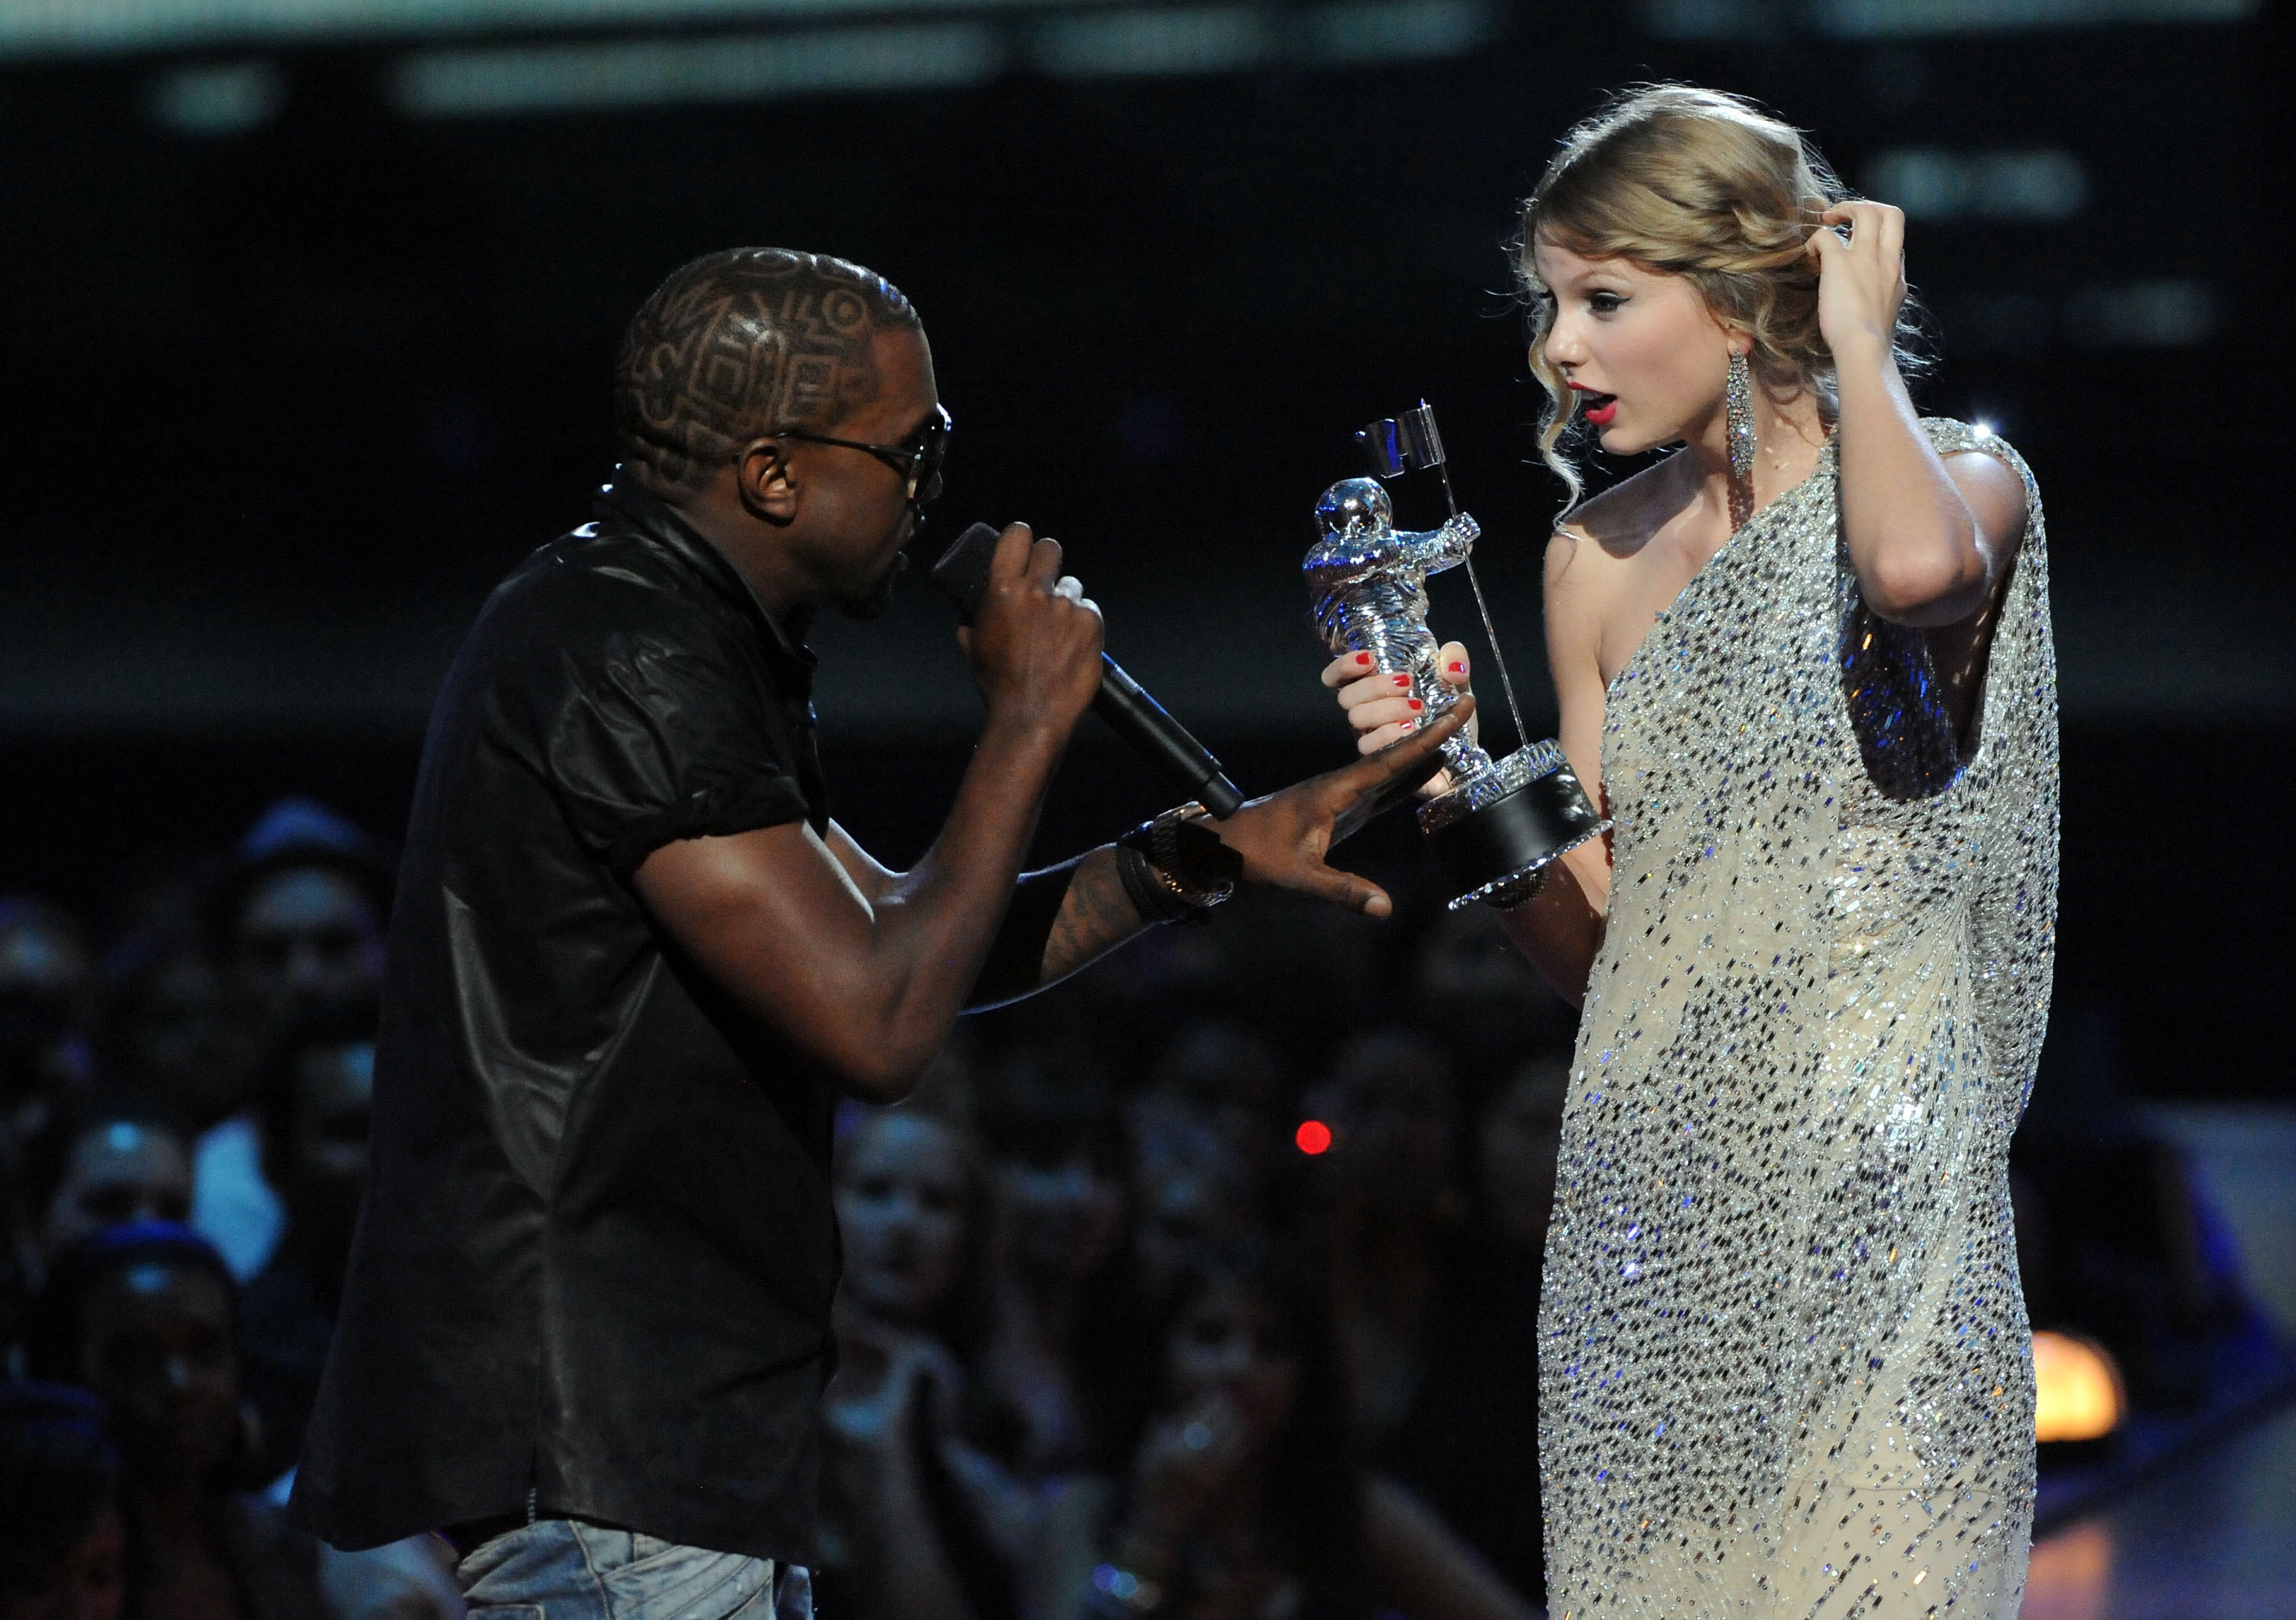 Kanye West stands on stage holding a microphone while a young Taylor Swift watches on, holding a VMA and looking stunned.